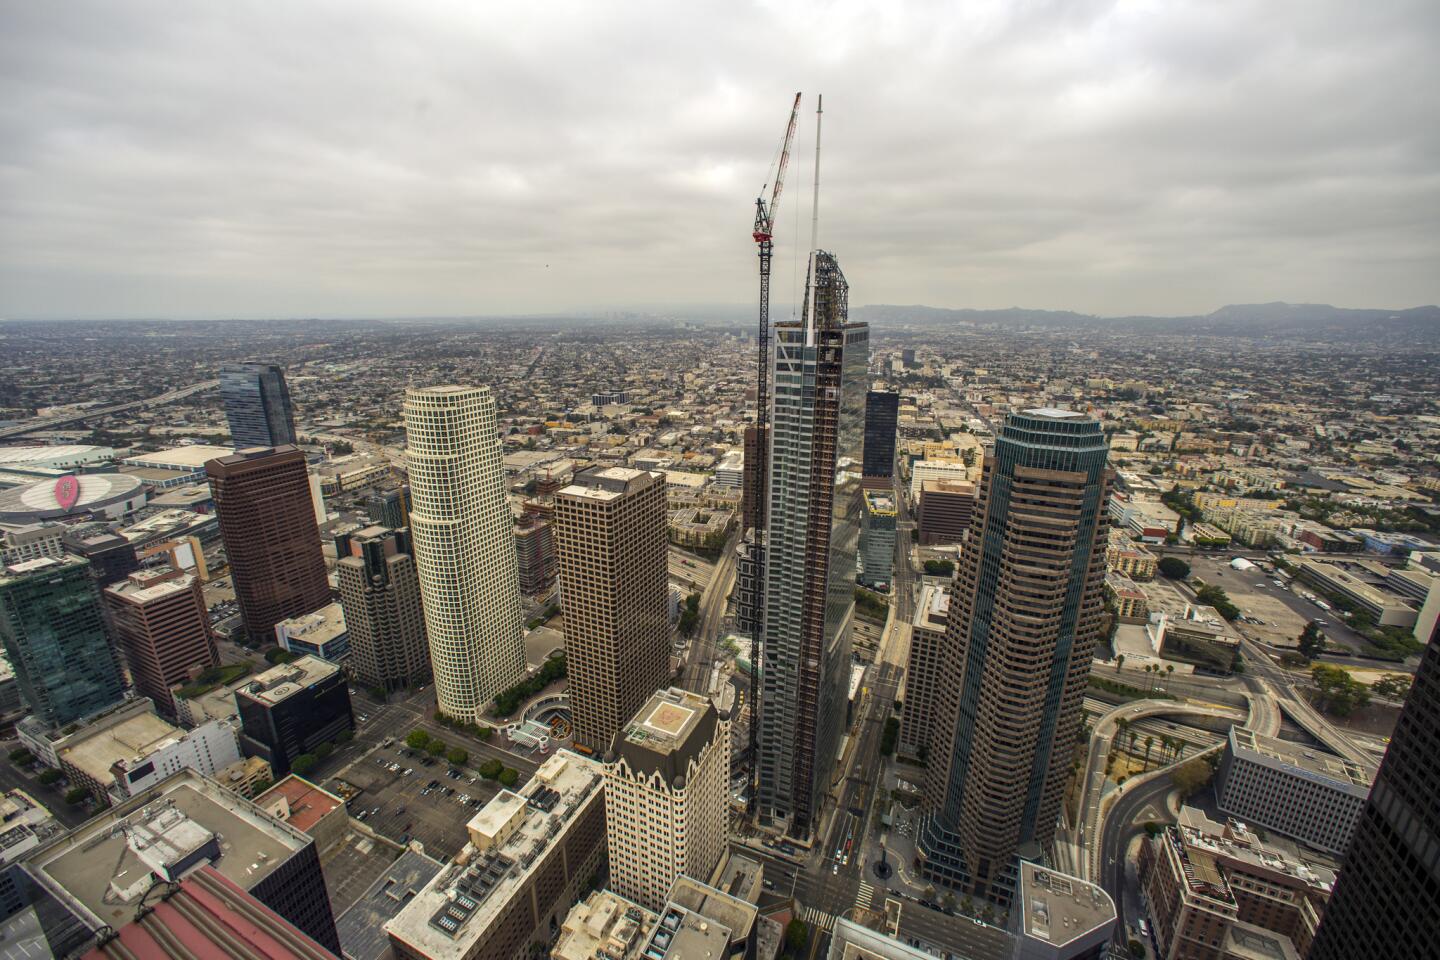 The installation of the spire atop L.A.'s 73-story Wilshire Grand, the tallest skyscraper in the West, in September 2016.